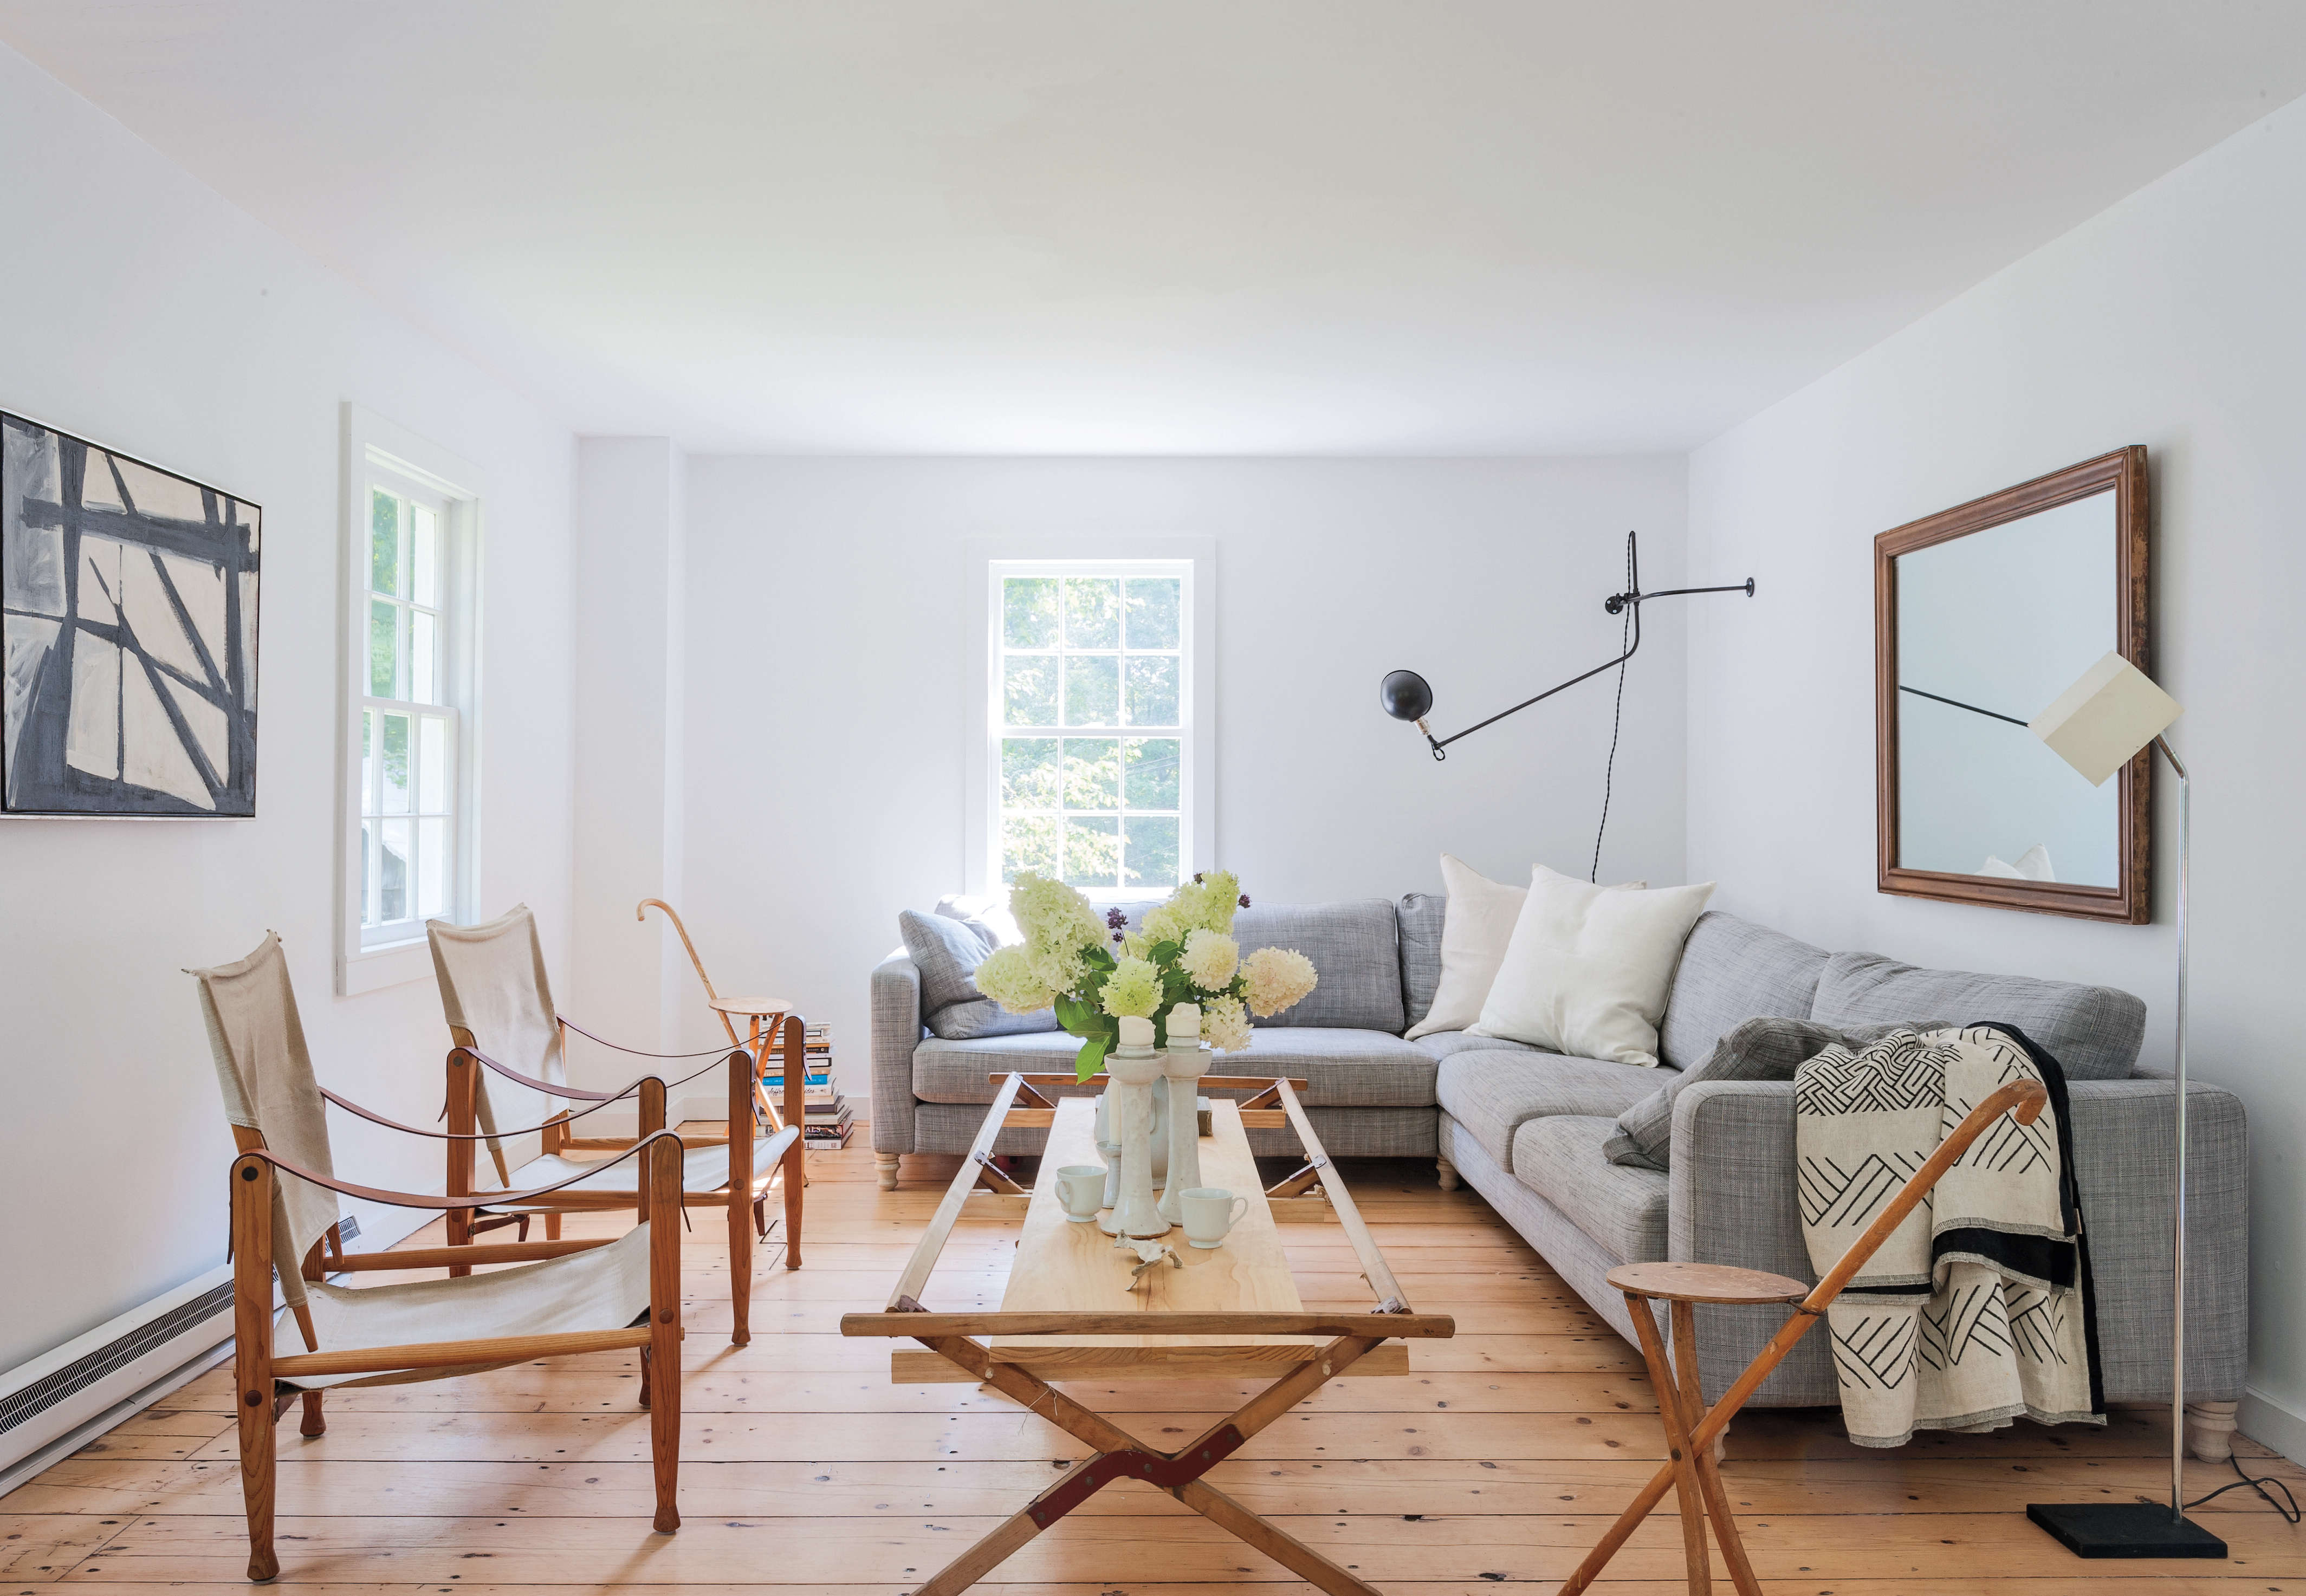 expert advice: 11 tips for making a room look bigger 13